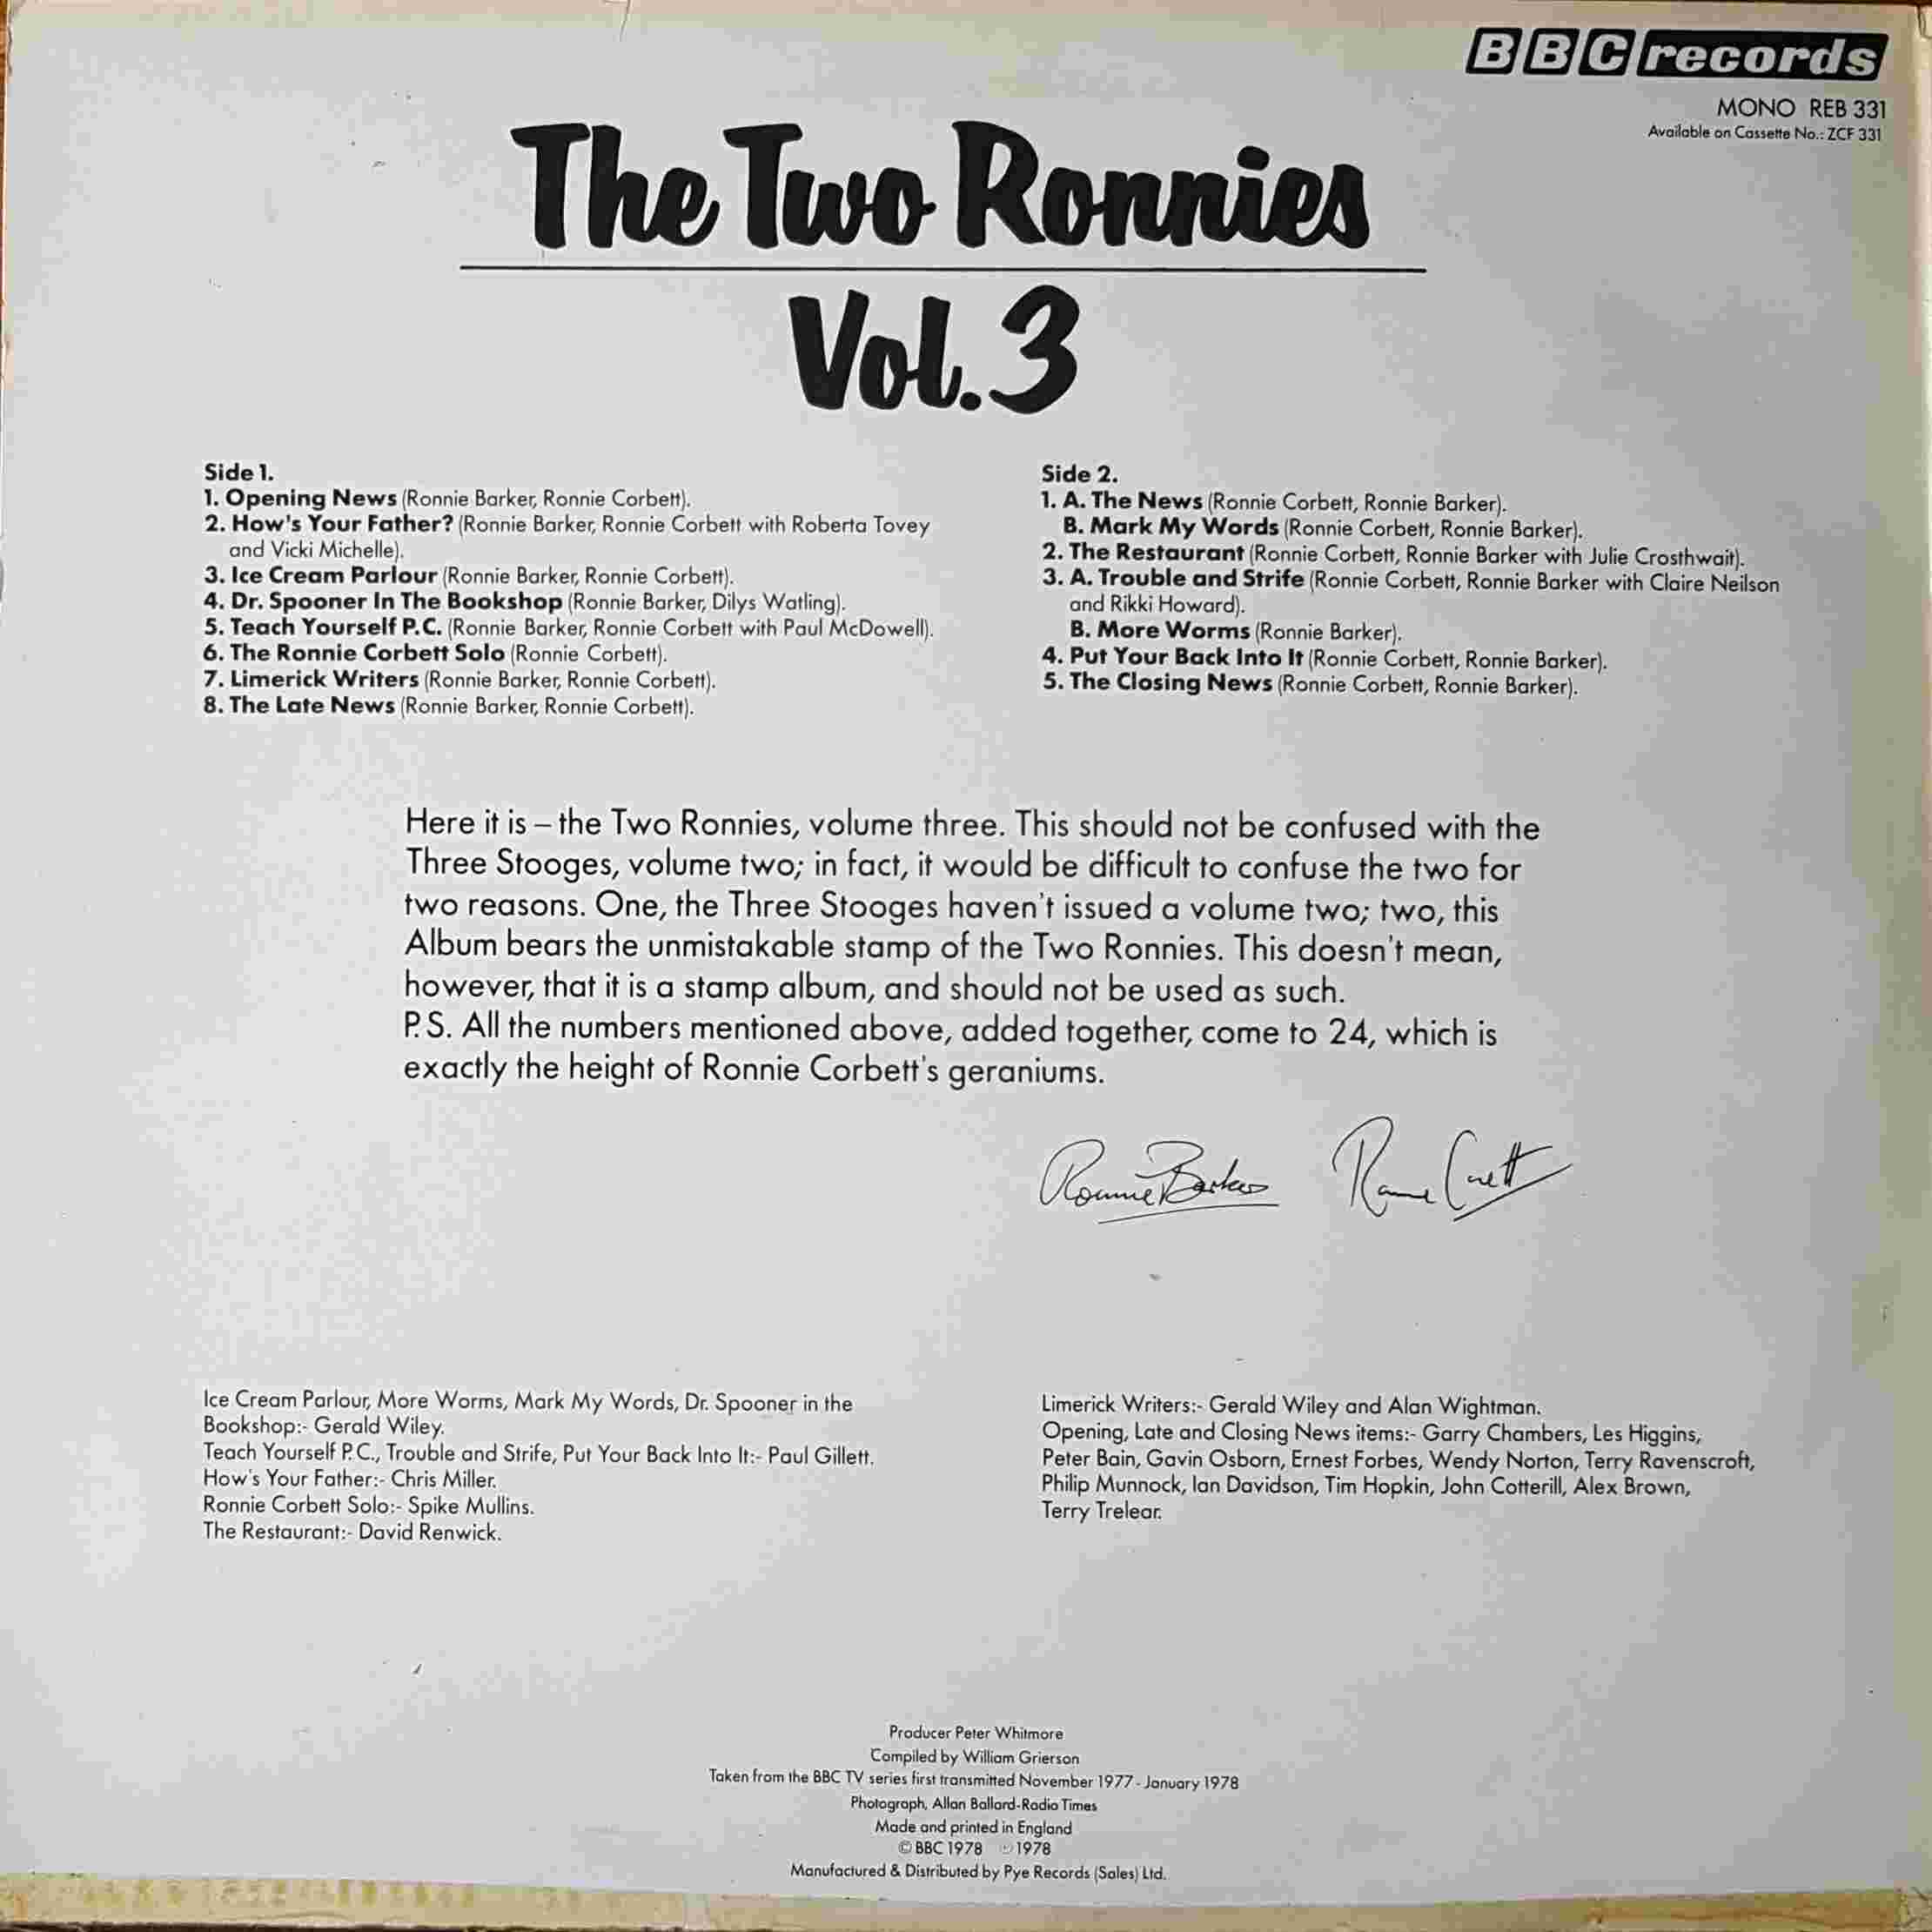 Picture of REB 331 The two Ronnies - Volume 3 by artist Various from the BBC records and Tapes library